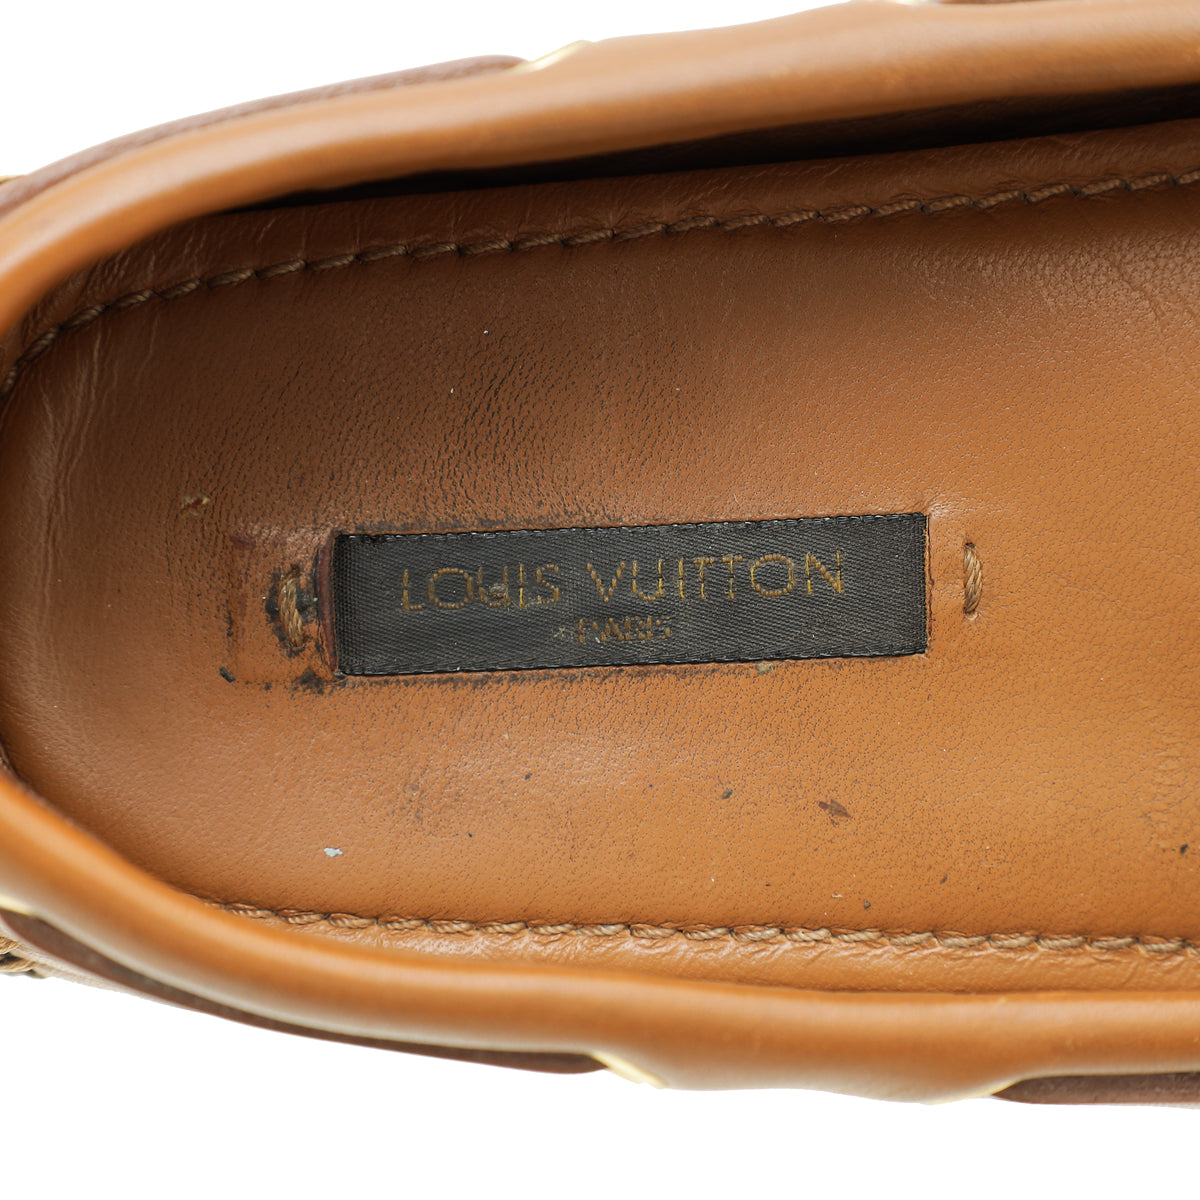 Gloria exotic leathers flats Louis Vuitton Brown size 3 UK in Exotic  leathers - 33293956